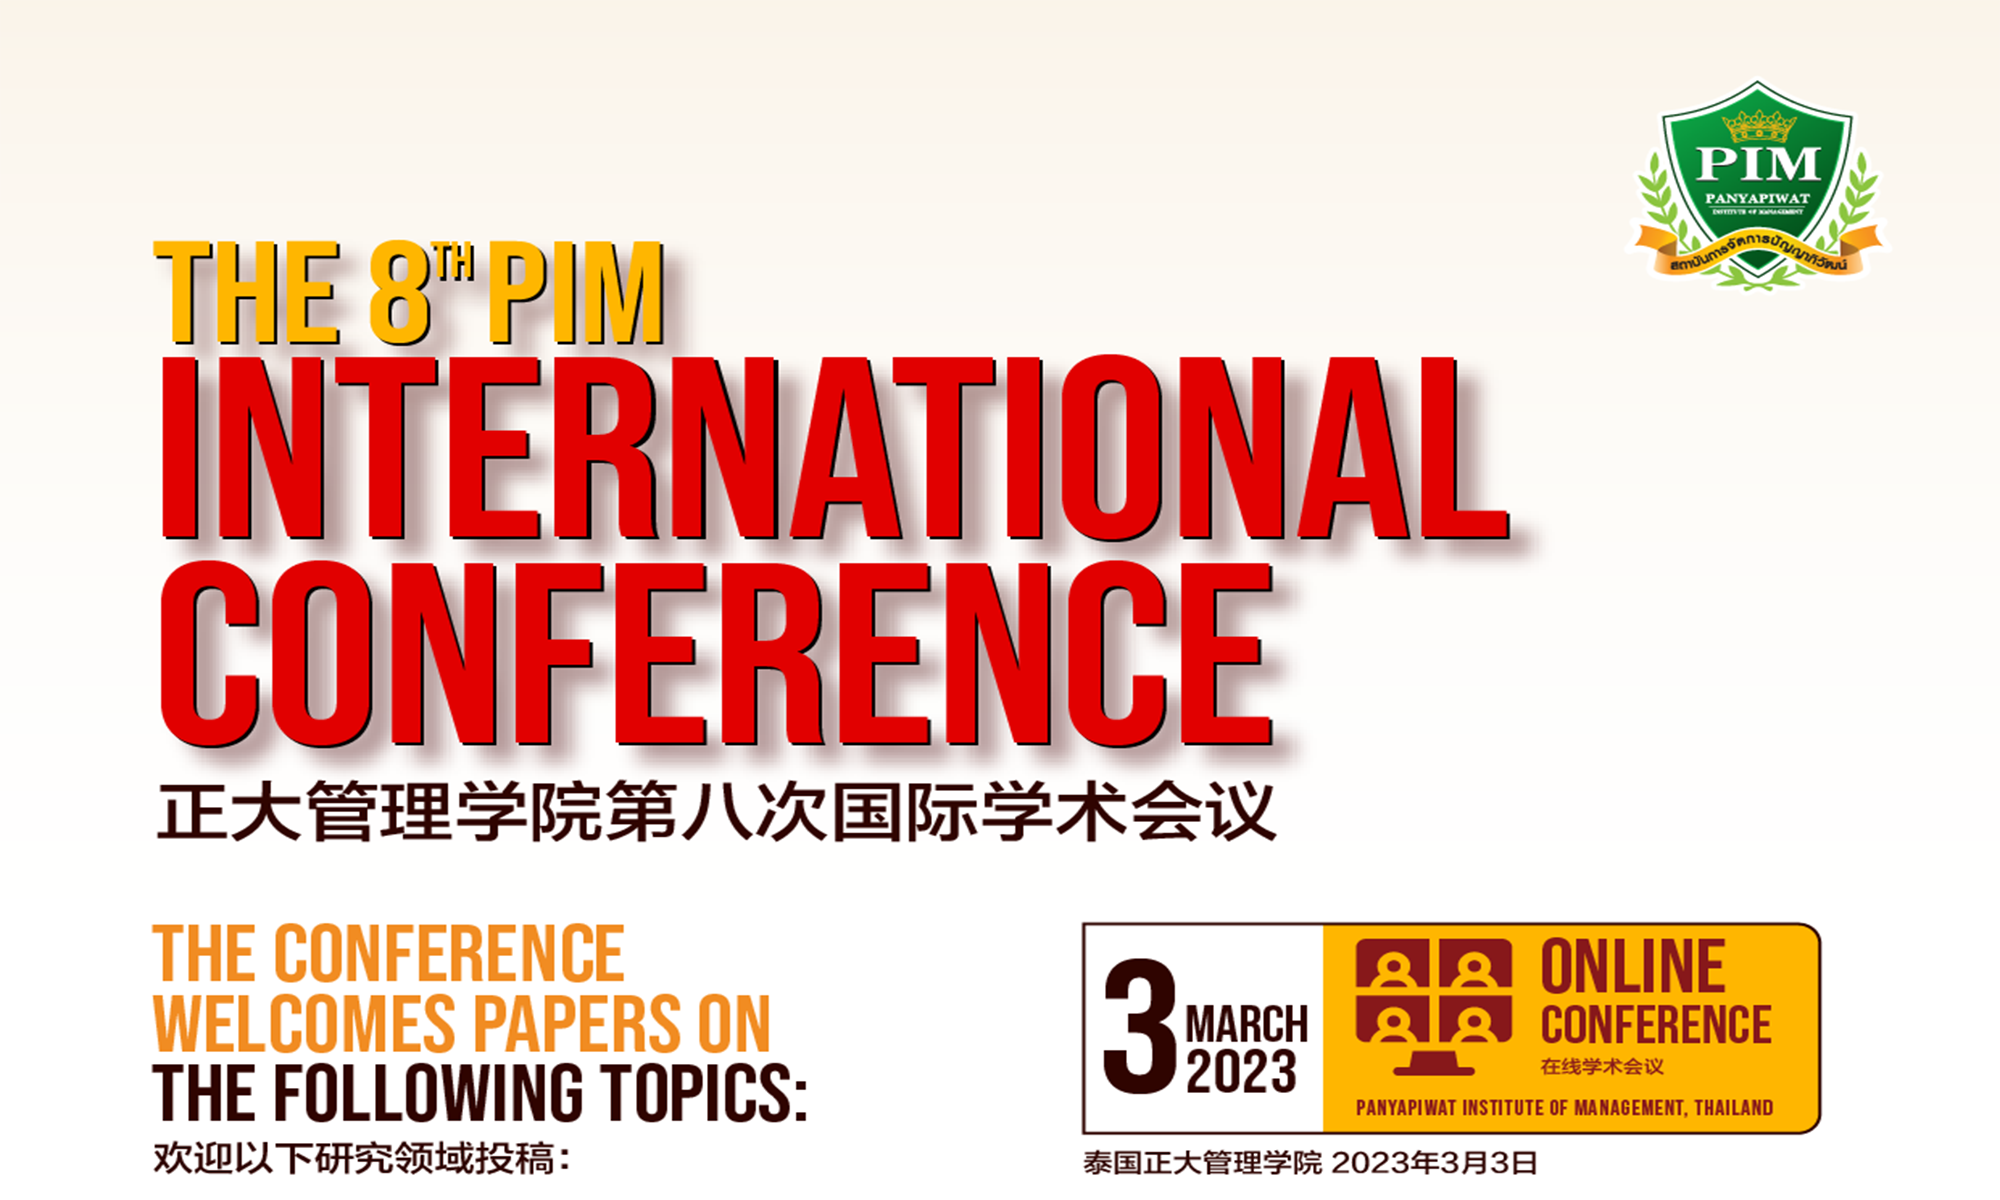 The 8th PIM International Conference